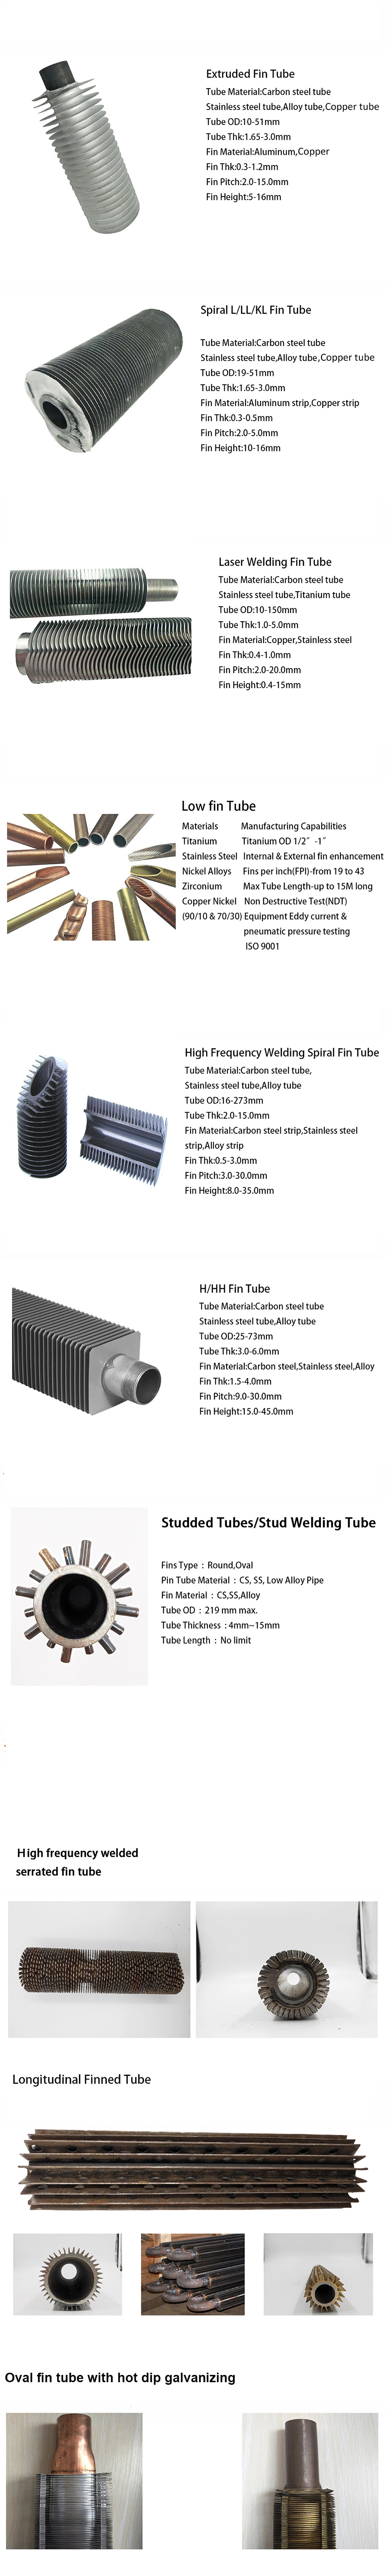 China Factory Aluminum Carbon Steel Spiral Copper Aluminum Extruded Fin/Finned Tube in Heat Exchanger for Cooler and Accessories Pipes Air Heat Exchanger